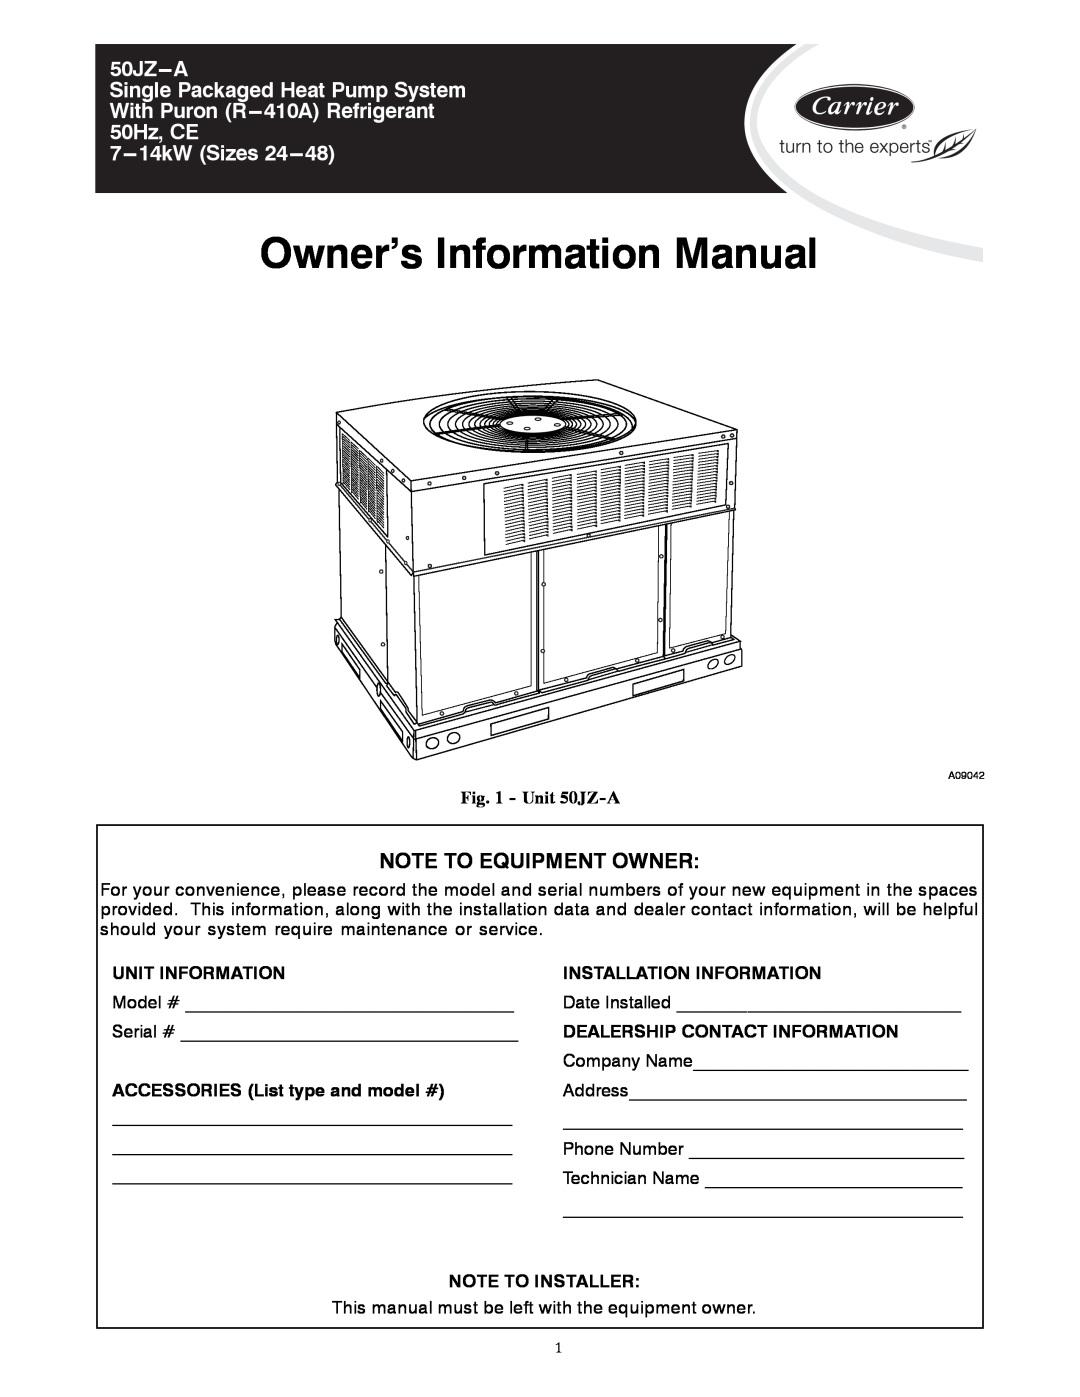 Carrier manual Unit 50JZ-A, Owner’s Information Manual, 50JZ---A Single Packaged Heat Pump System, 7---14kWSizes 